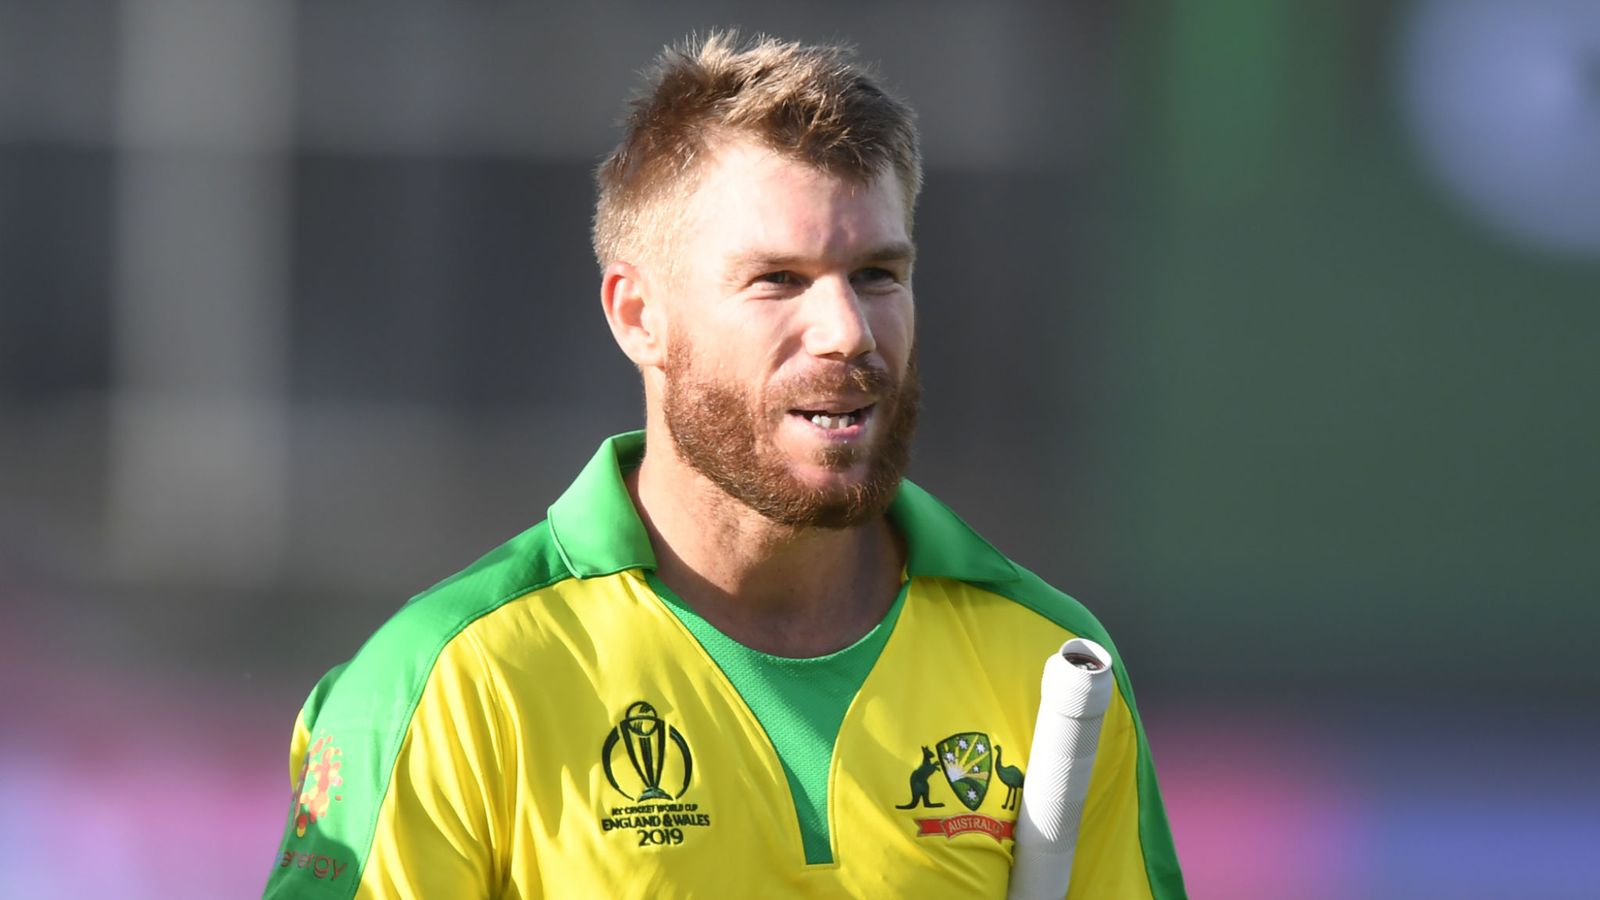 David Warner Height, Age, Wife, Family, Biography & More